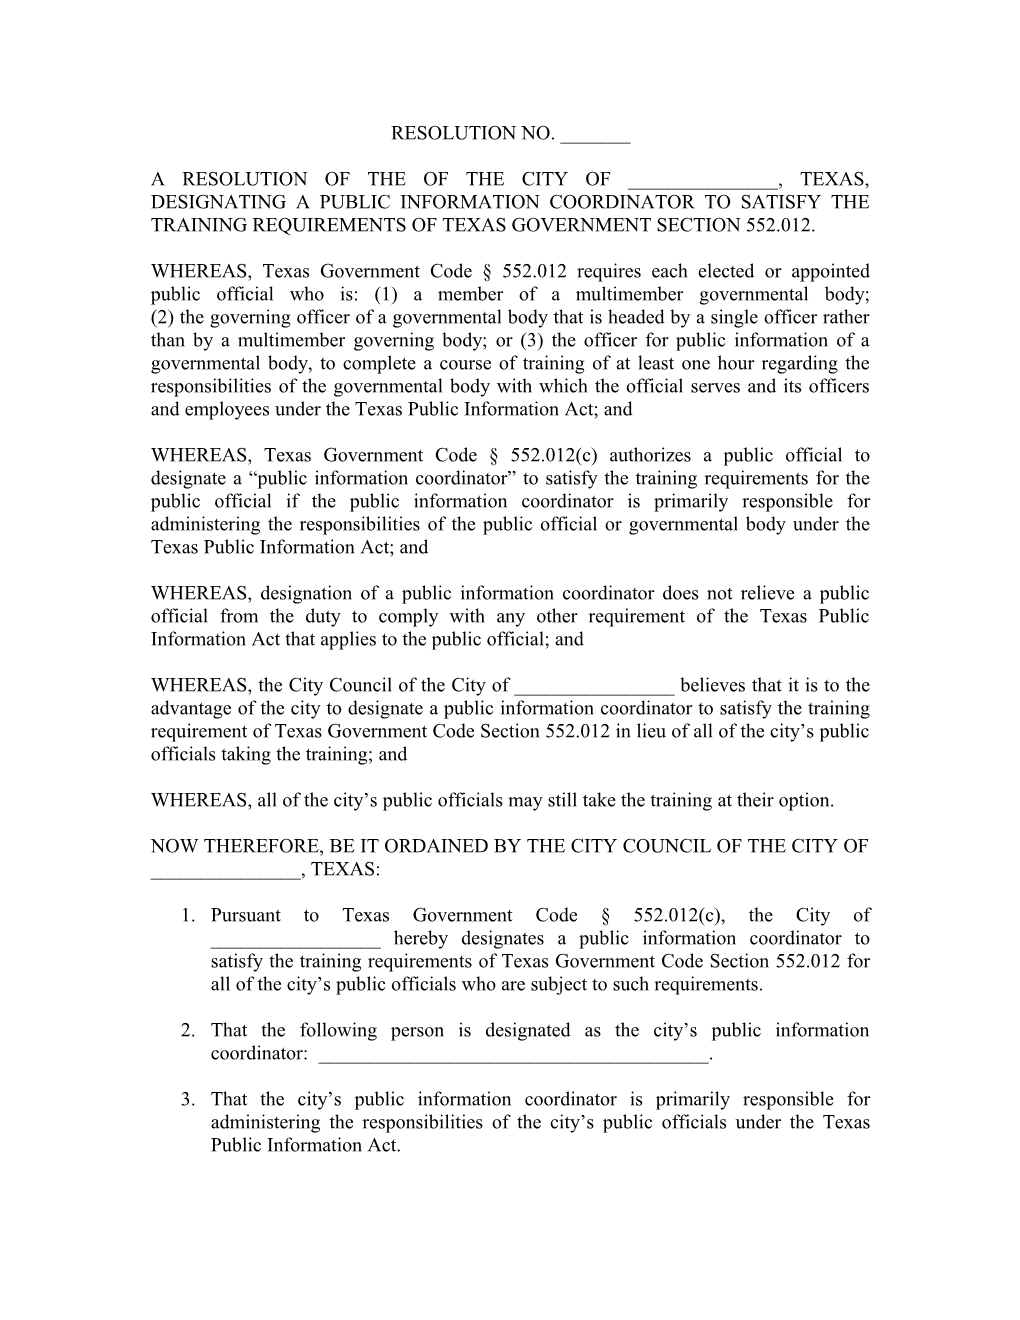 A Resolution of the of the City of ______, Texas, Designating a Public Information Coordinator